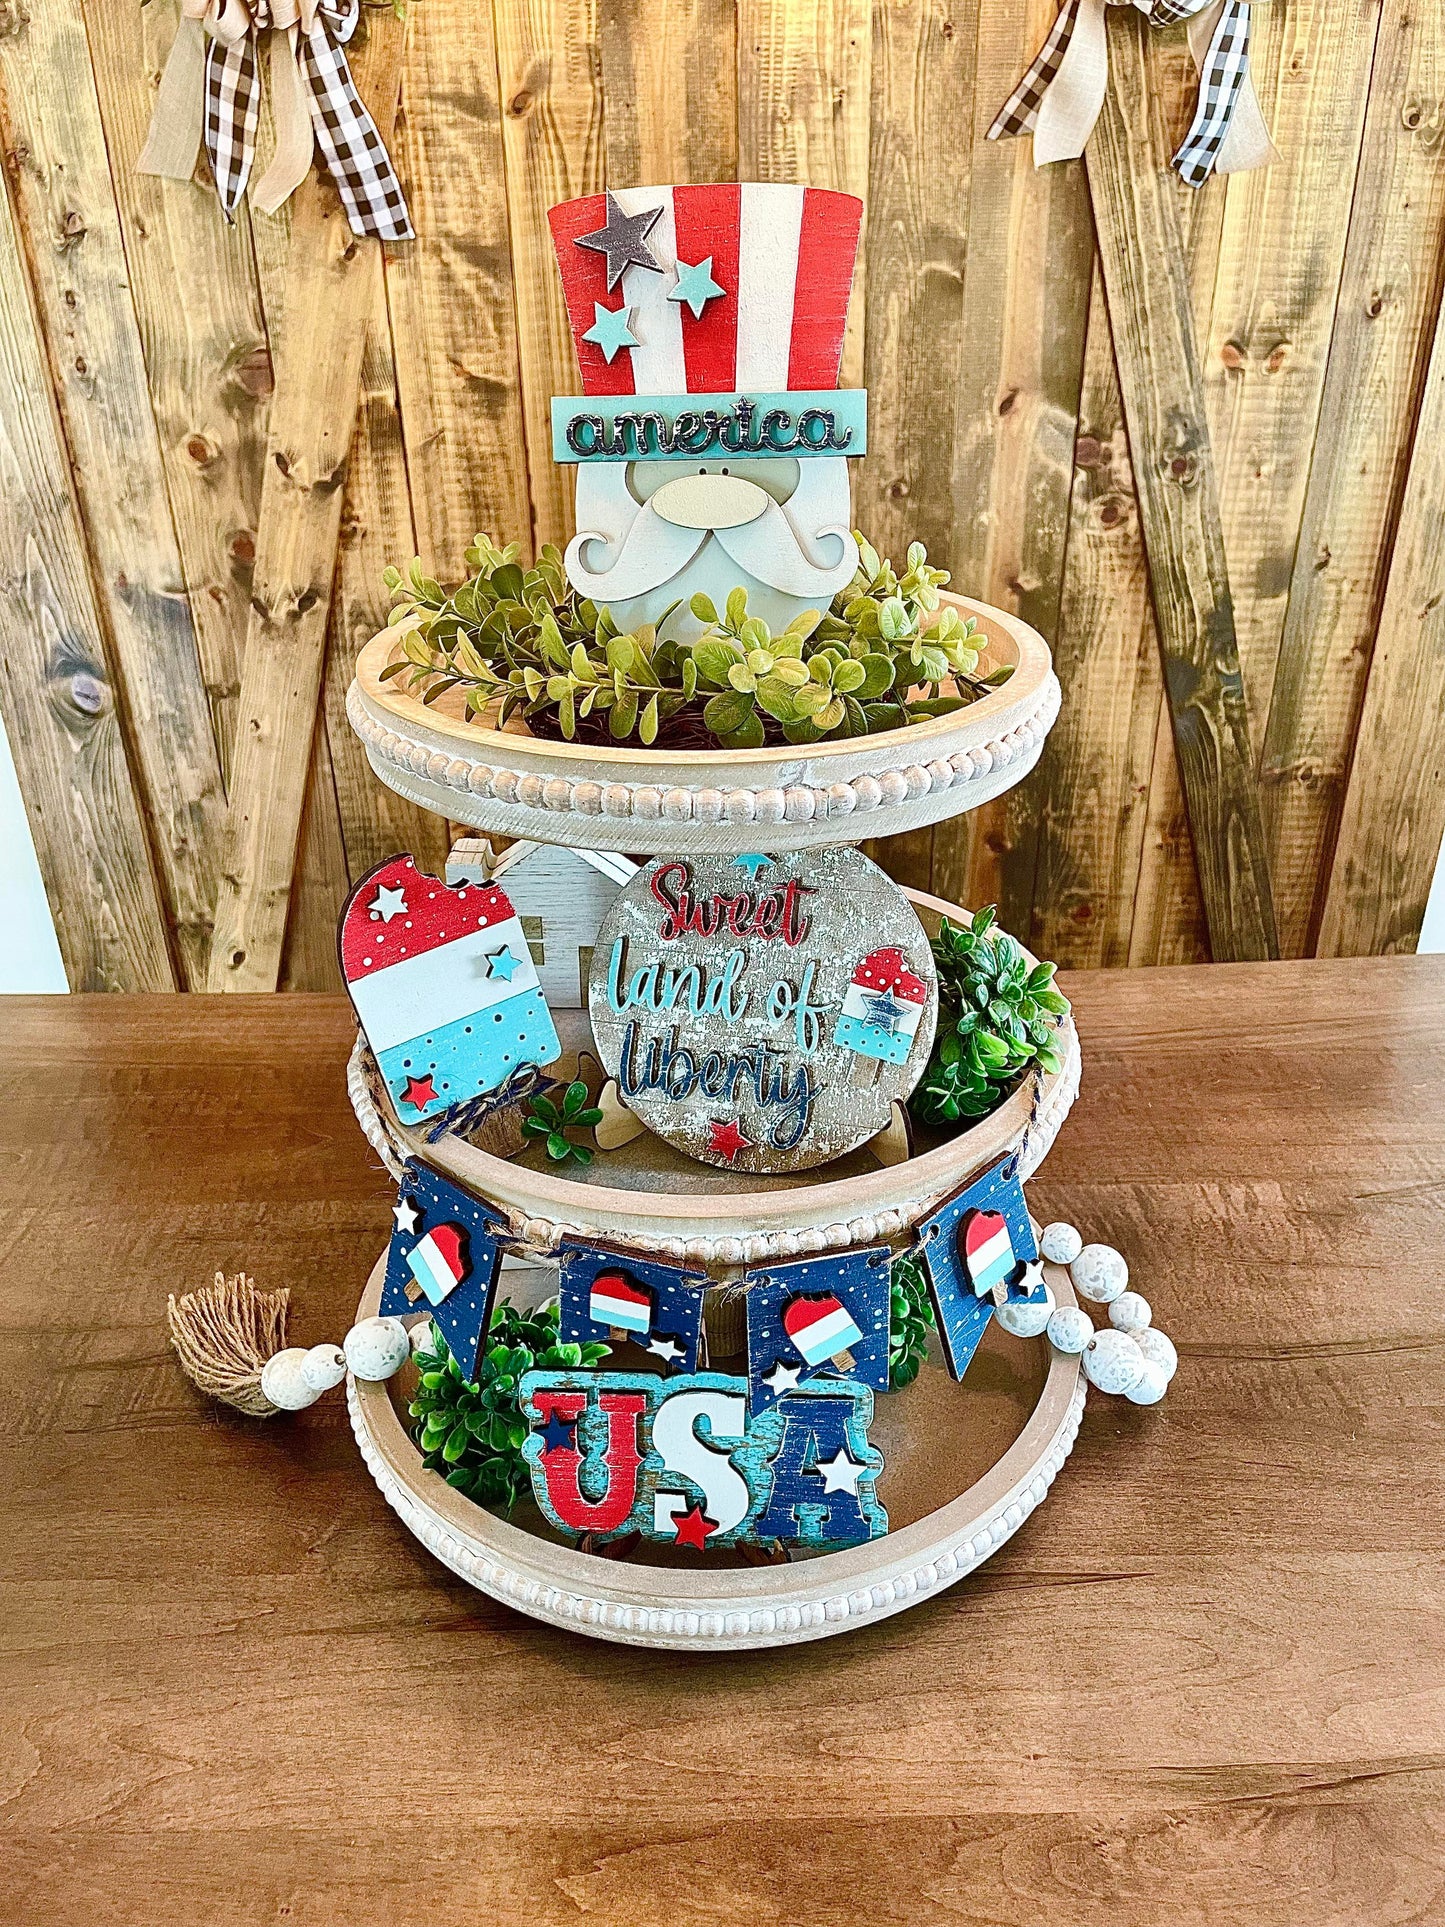 3D Tiered Tray Decor - Sweet Land of Liberty